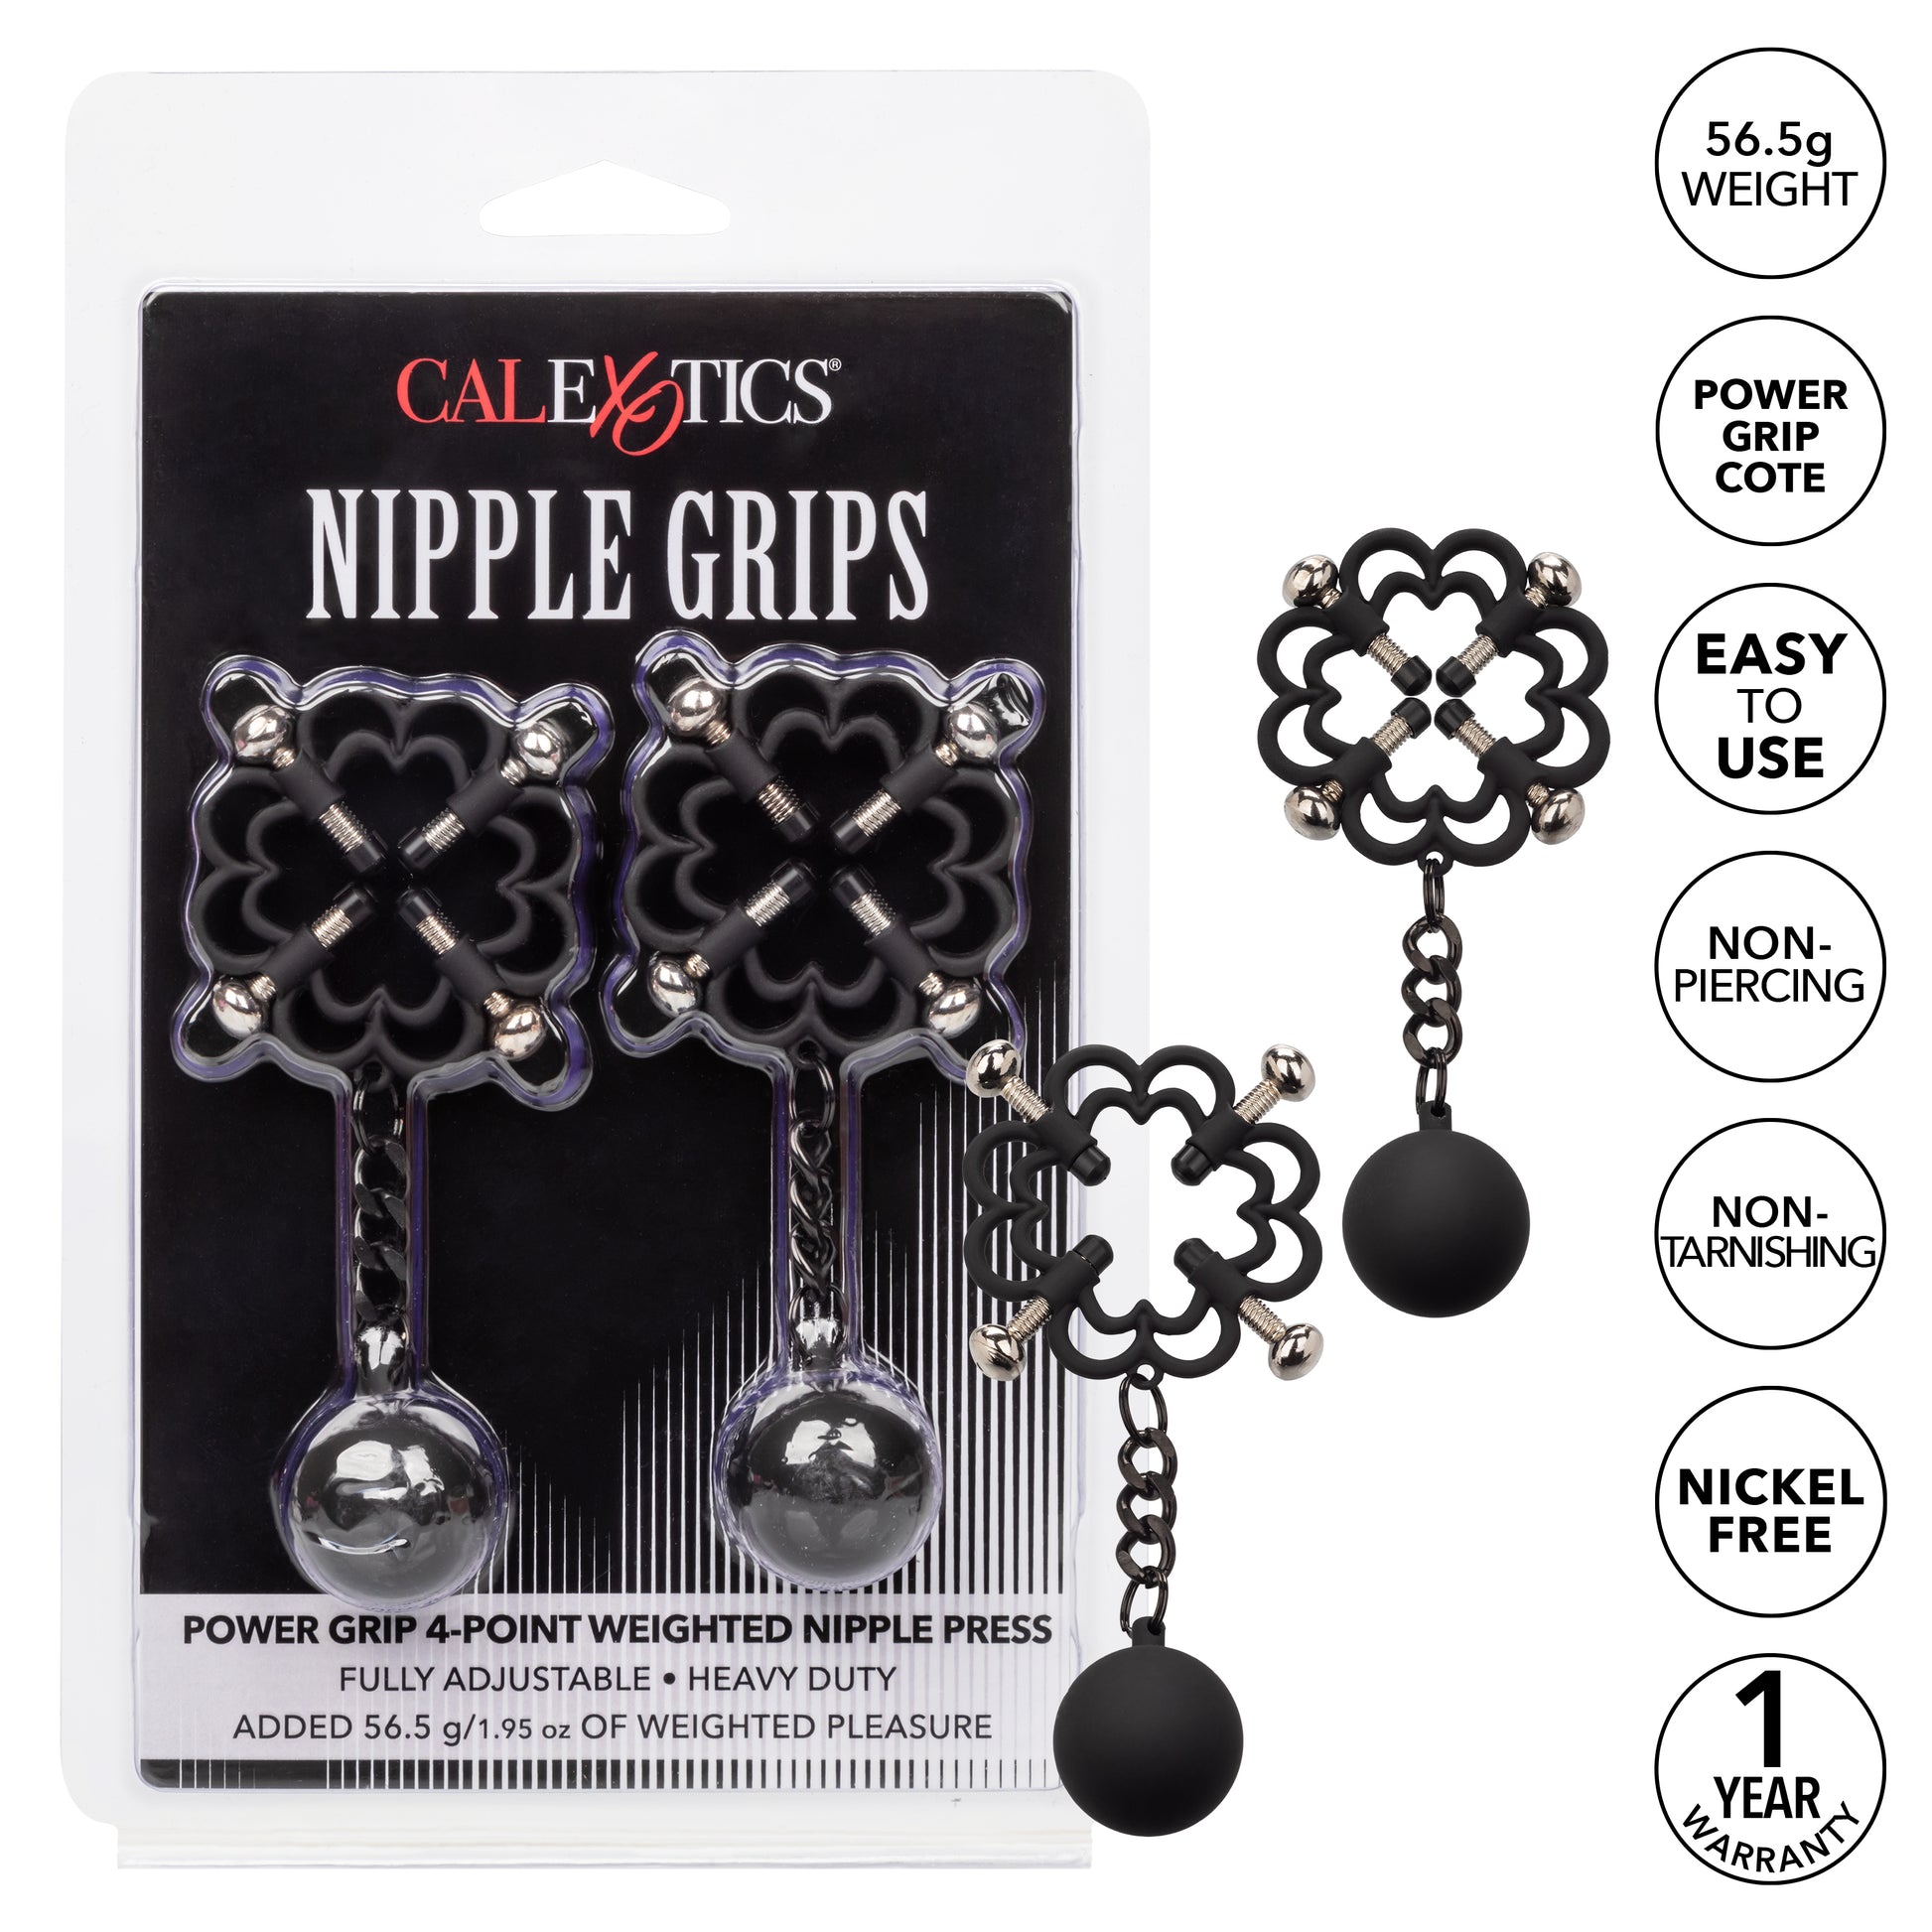 Nipple Grips Power Grip 4-Point Weighted Nipple  Press SE2551152